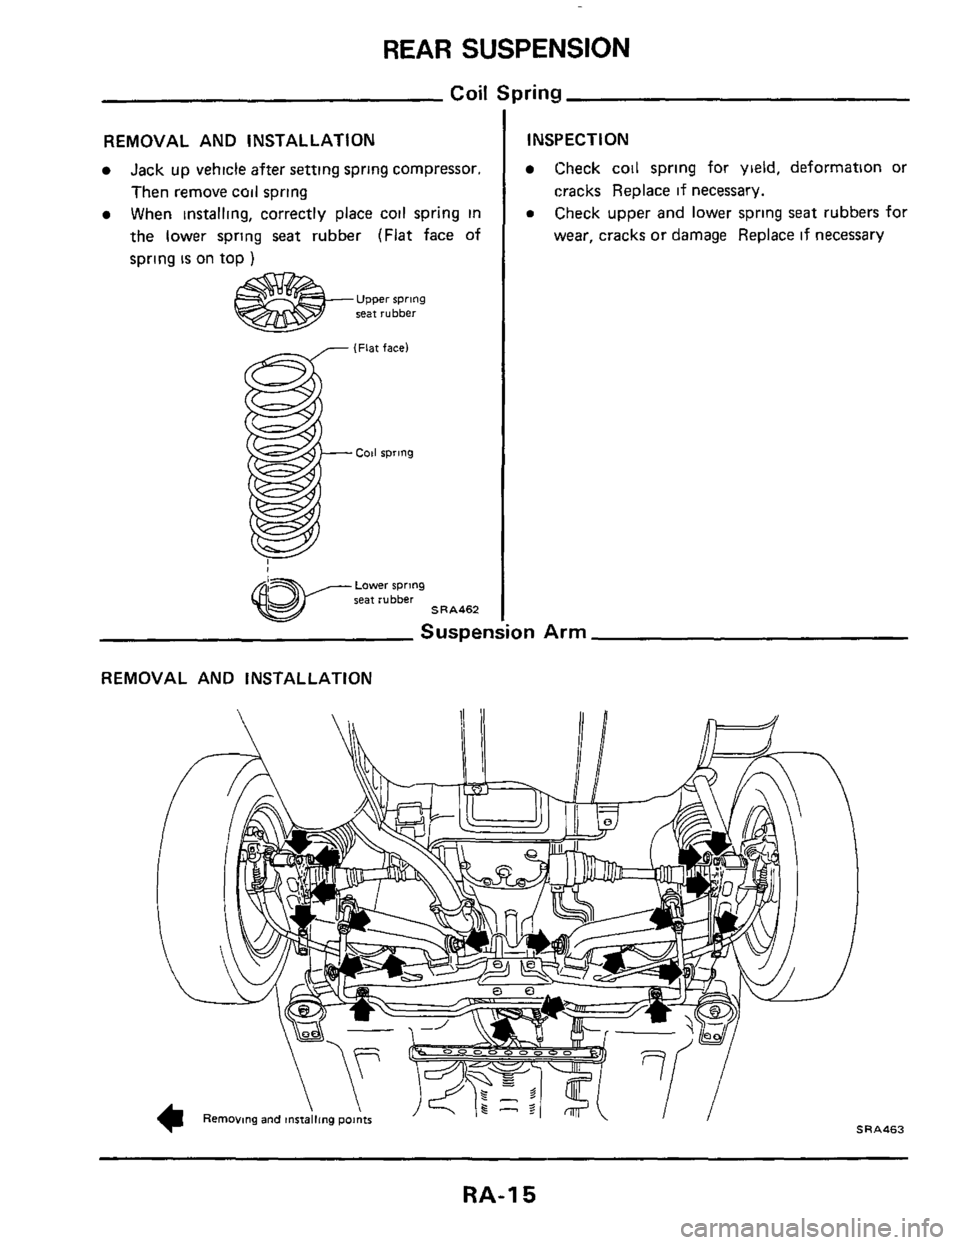 NISSAN 300ZX 1984 Z31 Rear Suspension Workshop Manual REAR SUSPENSION 
Coil Spring 
REMOVAL AND INSTALLATION 
Jack up vehicle  after setting  spring compressor. 
Then  remove  coil spring 
When  installing,  correctly place coil spring  in 
the  lower  s